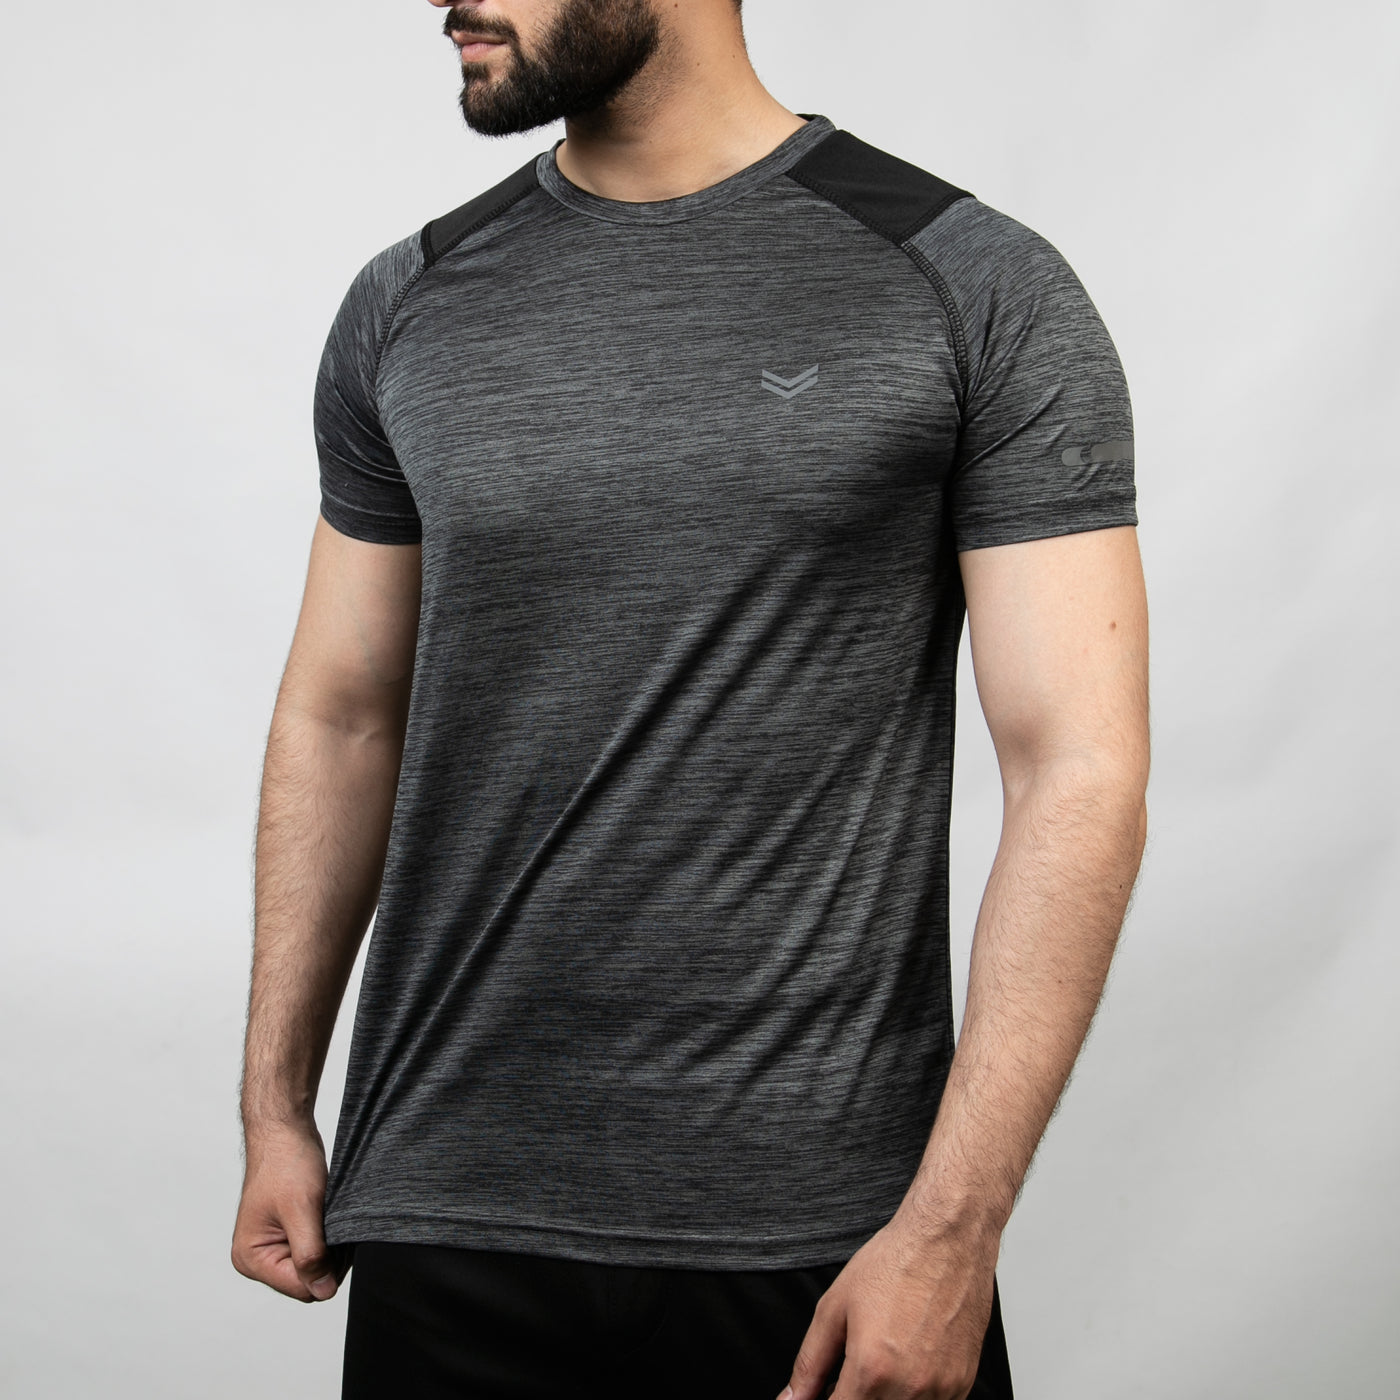 Textured Charcoal Quick Dry T-Shirt with Black Panels & Reflectors